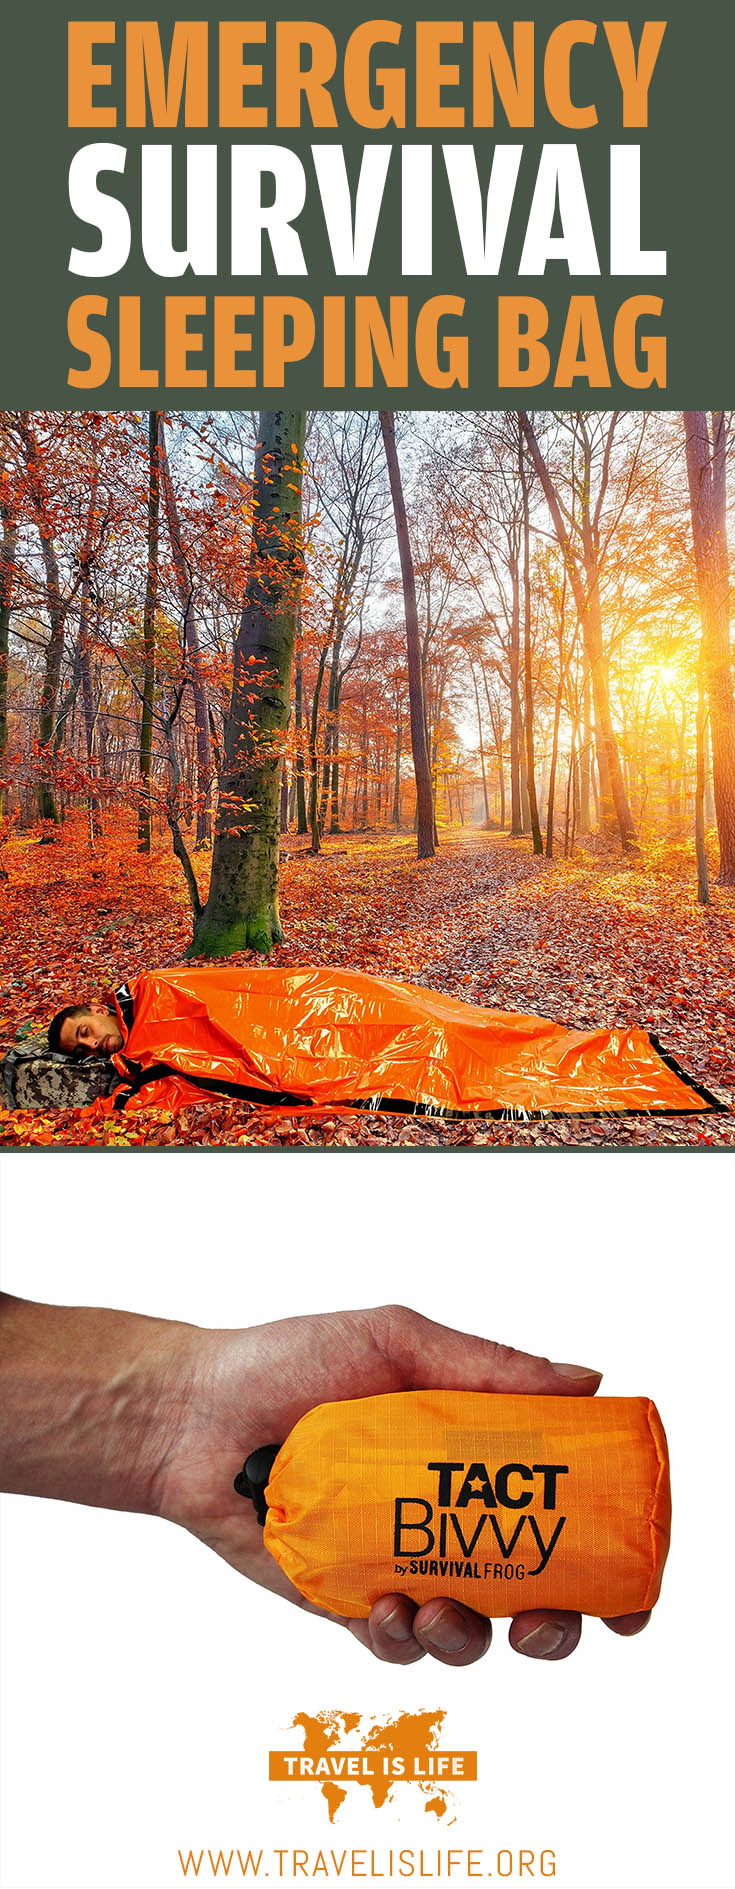 Emergency Survival Sleeping Bag For Survival Oriented Campers and Hikers